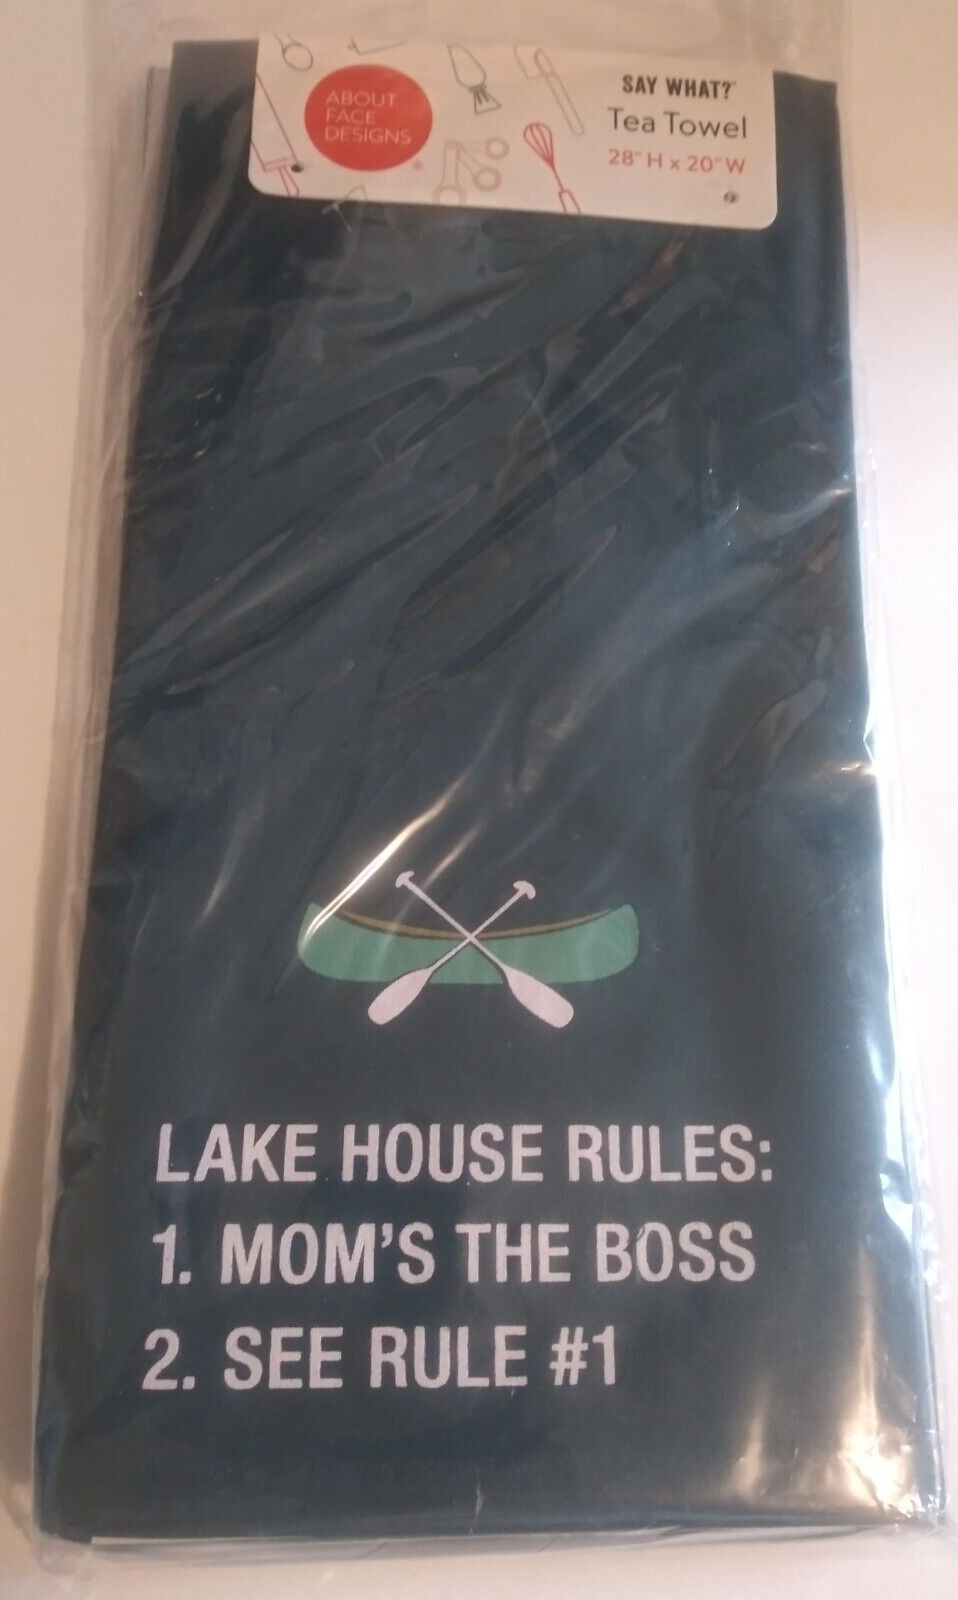 Lake House Rules:  Kitchen, Tea Towel by About Face Designs 28in x 20in.